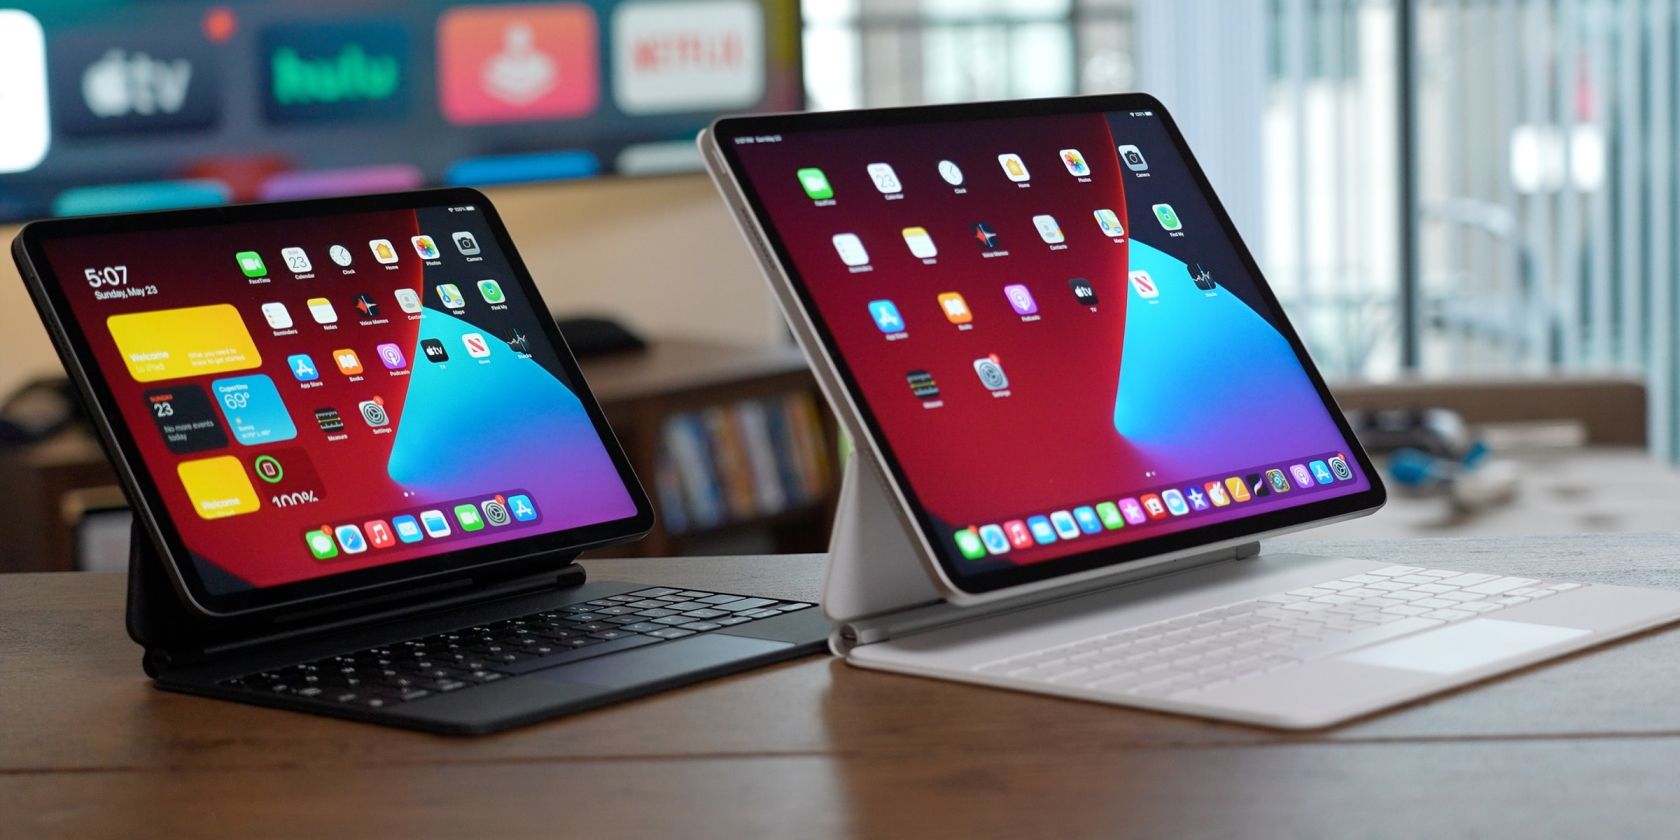 iPad Pro 11-inch and 12.9-inch models